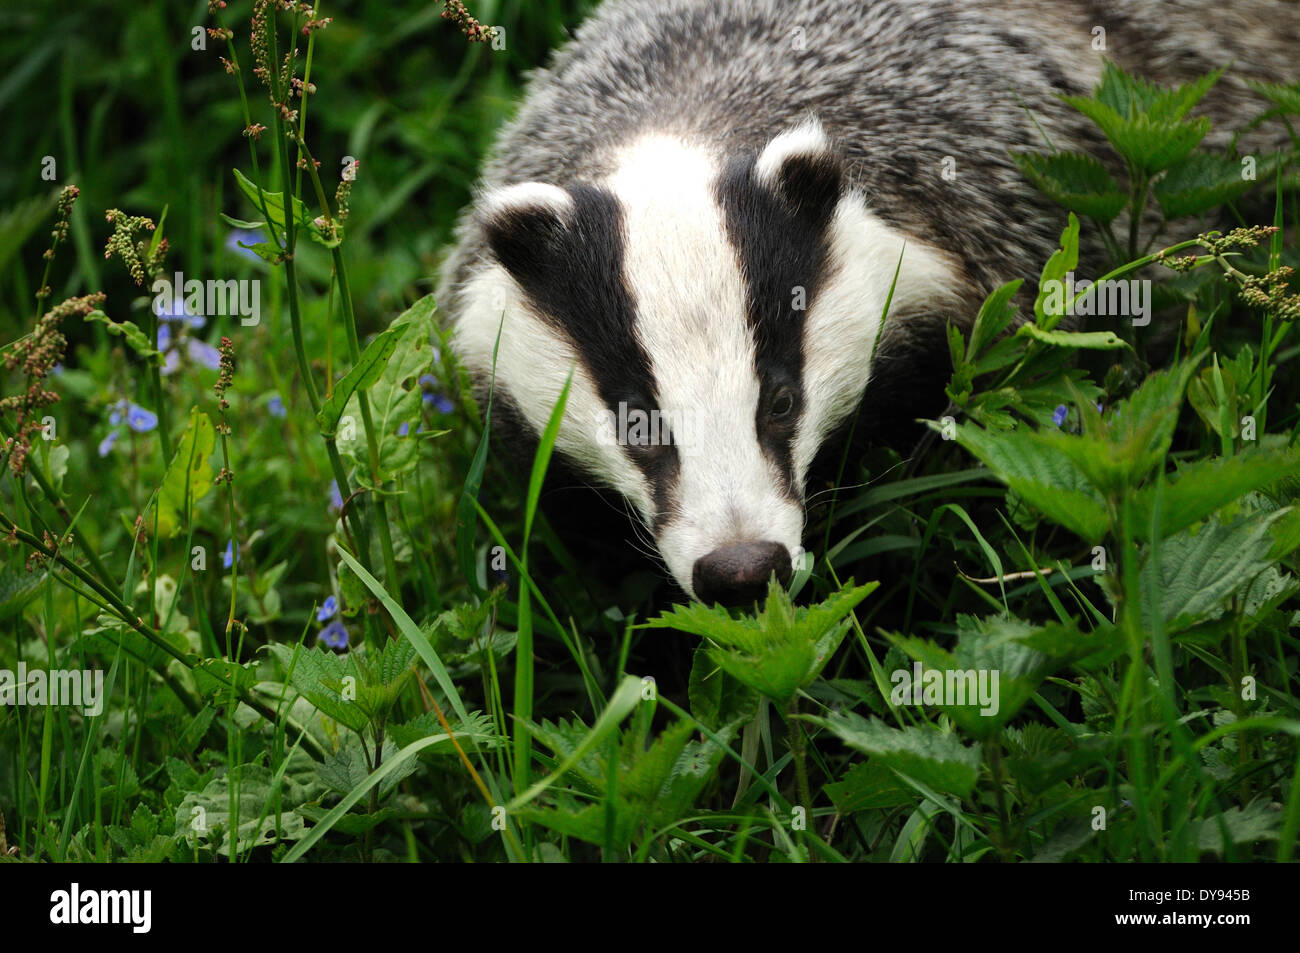 Badger, Meles meles, spring, meadow, mustelidae, martens, animal, animals, Germany, Europe, Stock Photo